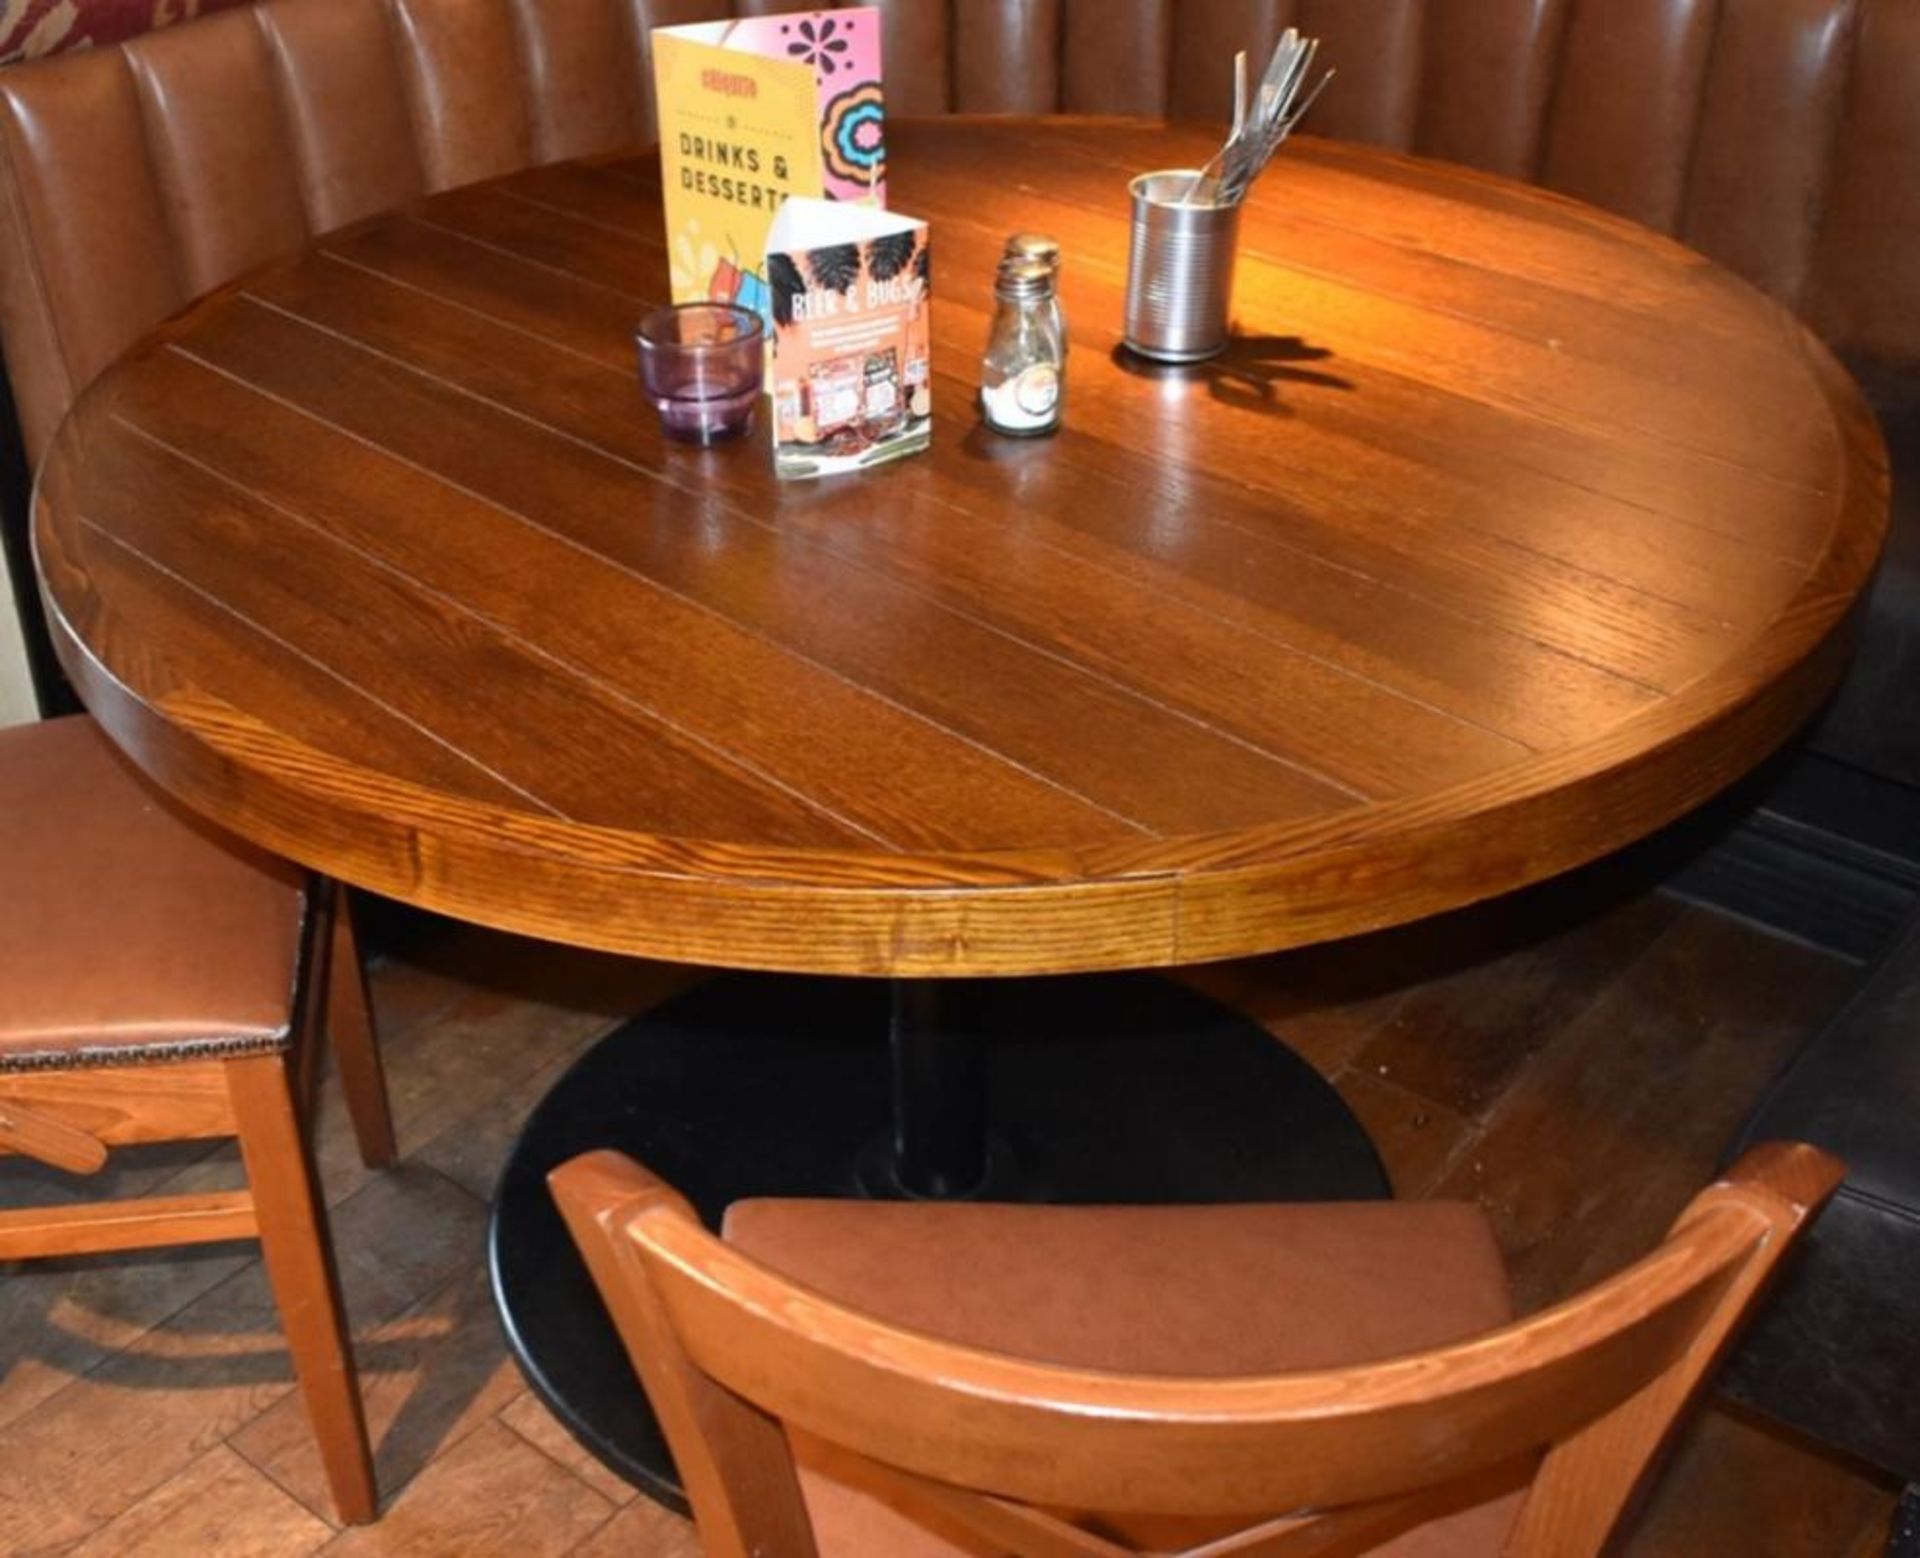 1 x Large Restaurant Dining Table With Brown Panelled Effect Top and Cast Iron Bases - H76 x W120 cm - Image 2 of 4